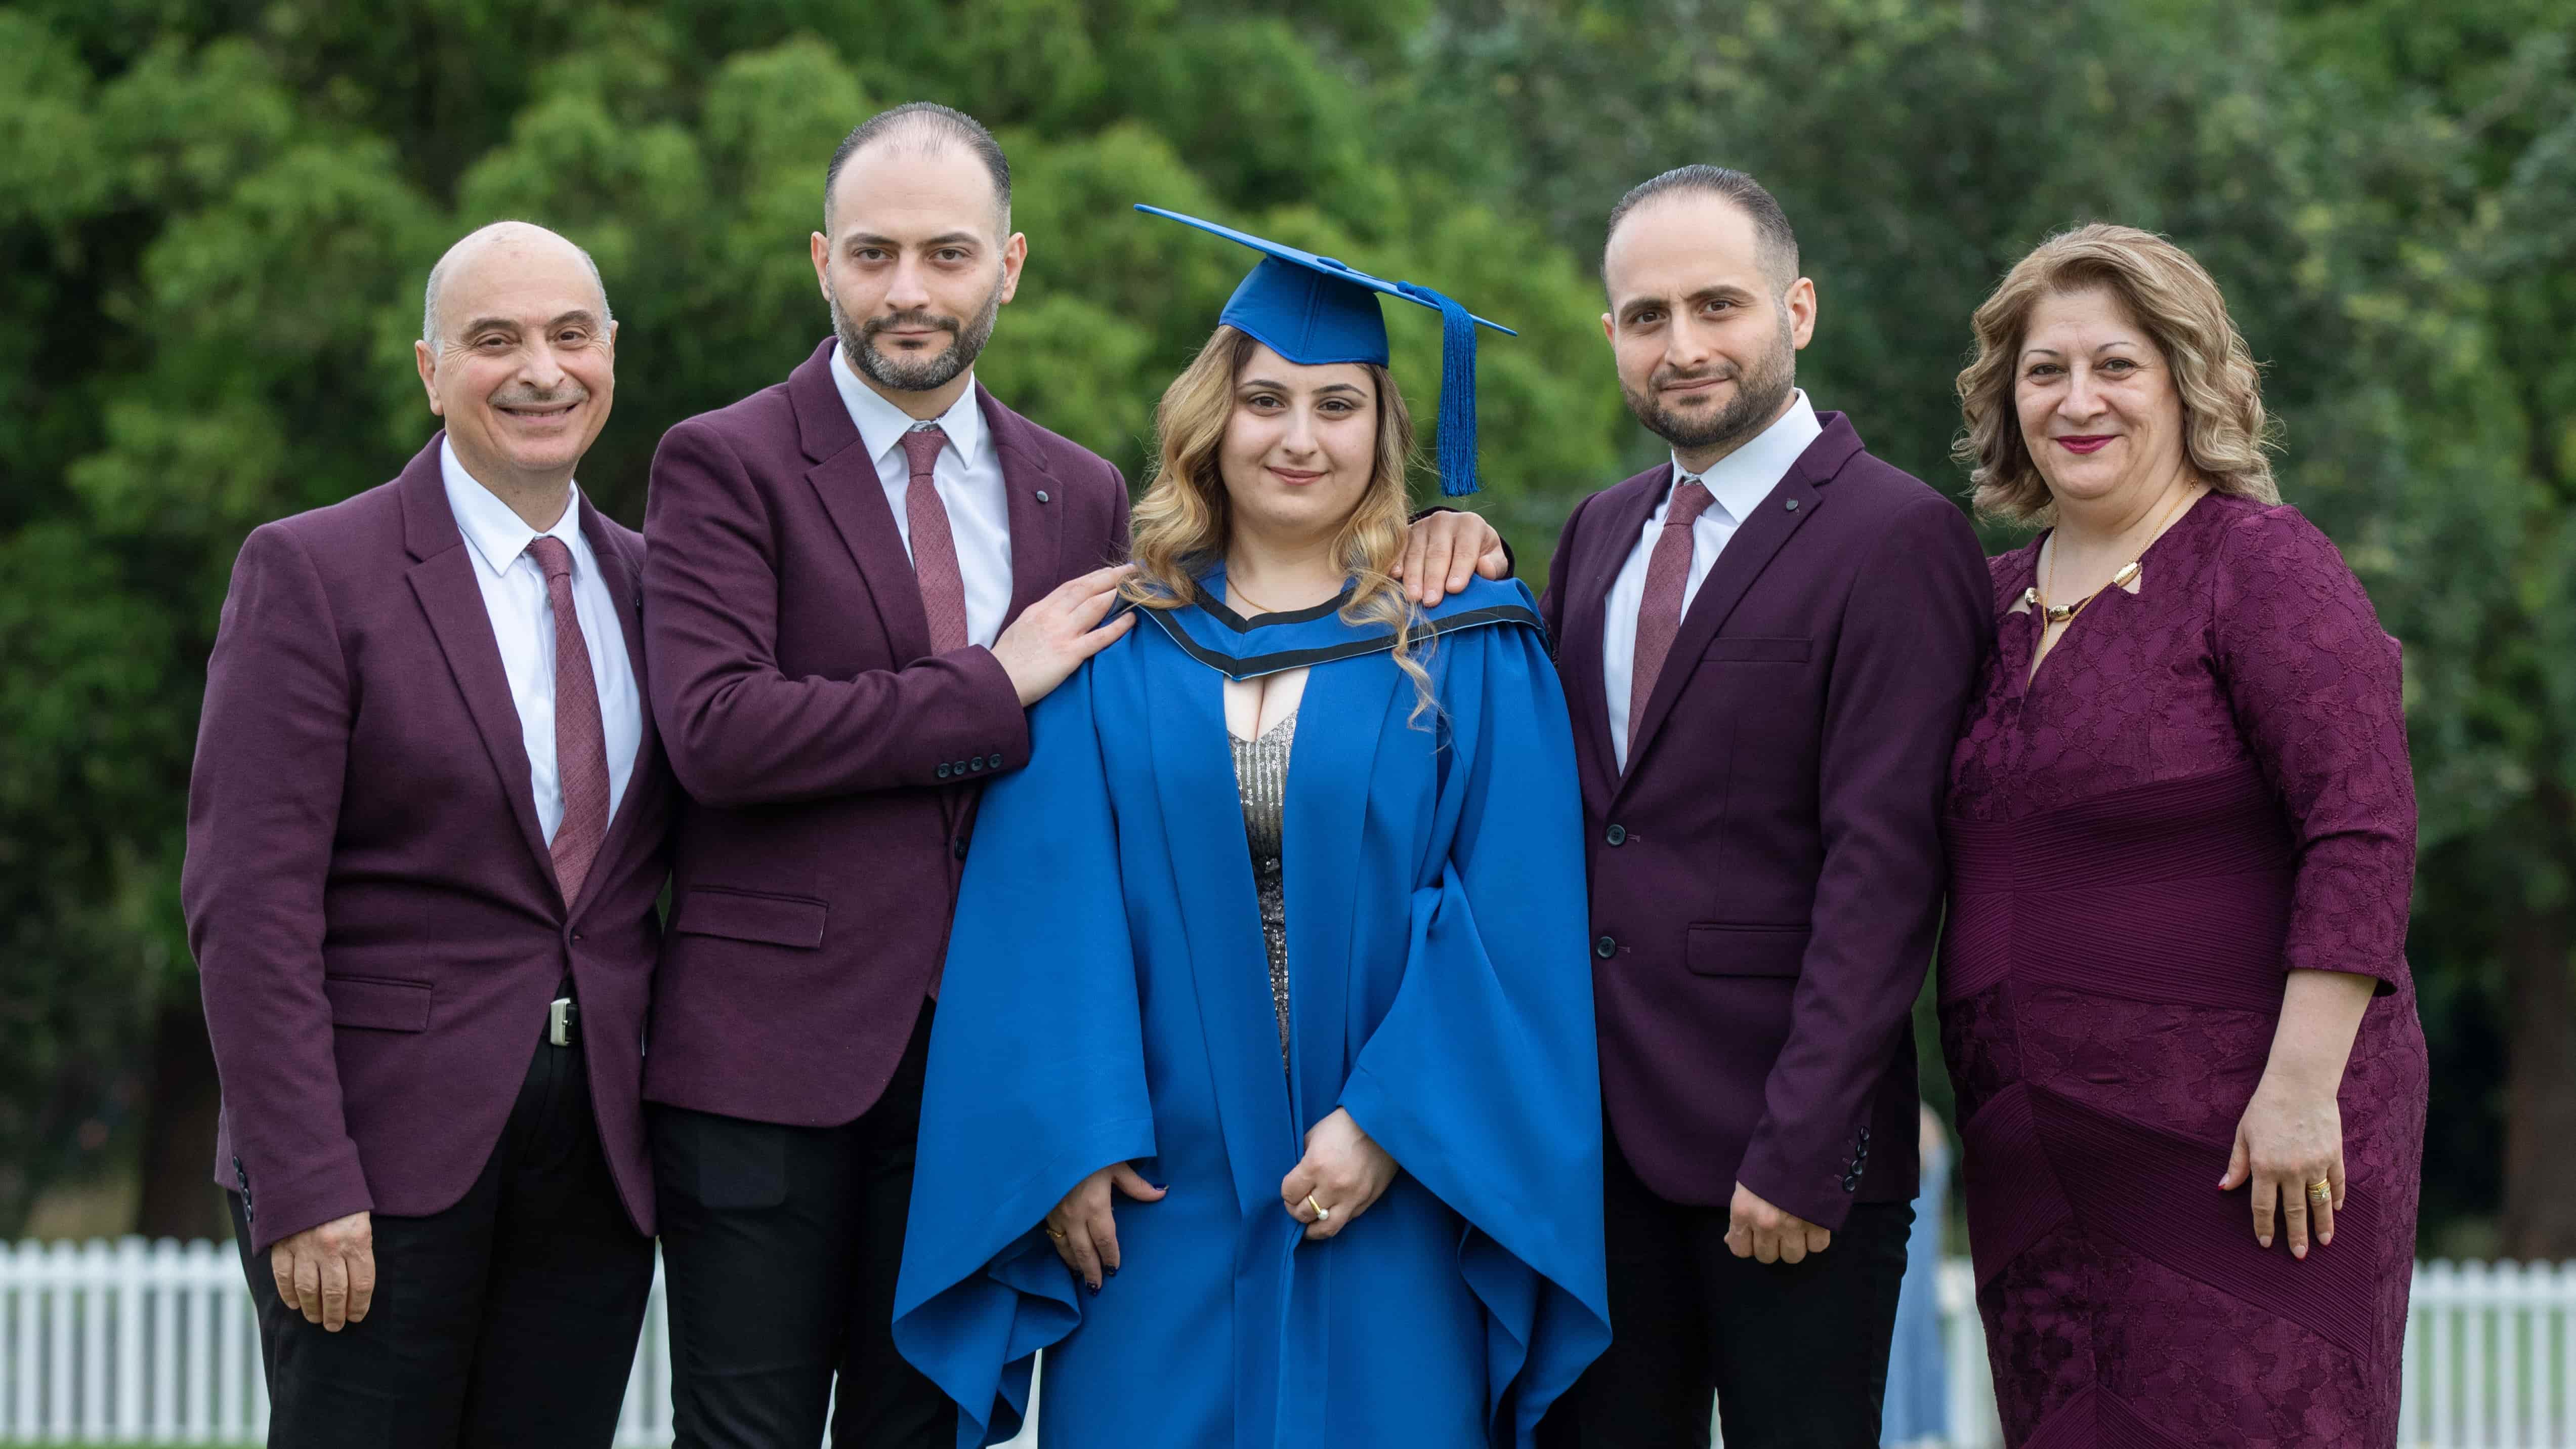 Dawood, Fadi, Lord, Majd and Reem Thabet at graduation day. Lord wears a blue graduation gown and cap, while the rest of the family wear burgundy suits and a dress. They are close together and all smiling. Photo: Andy Zakeli